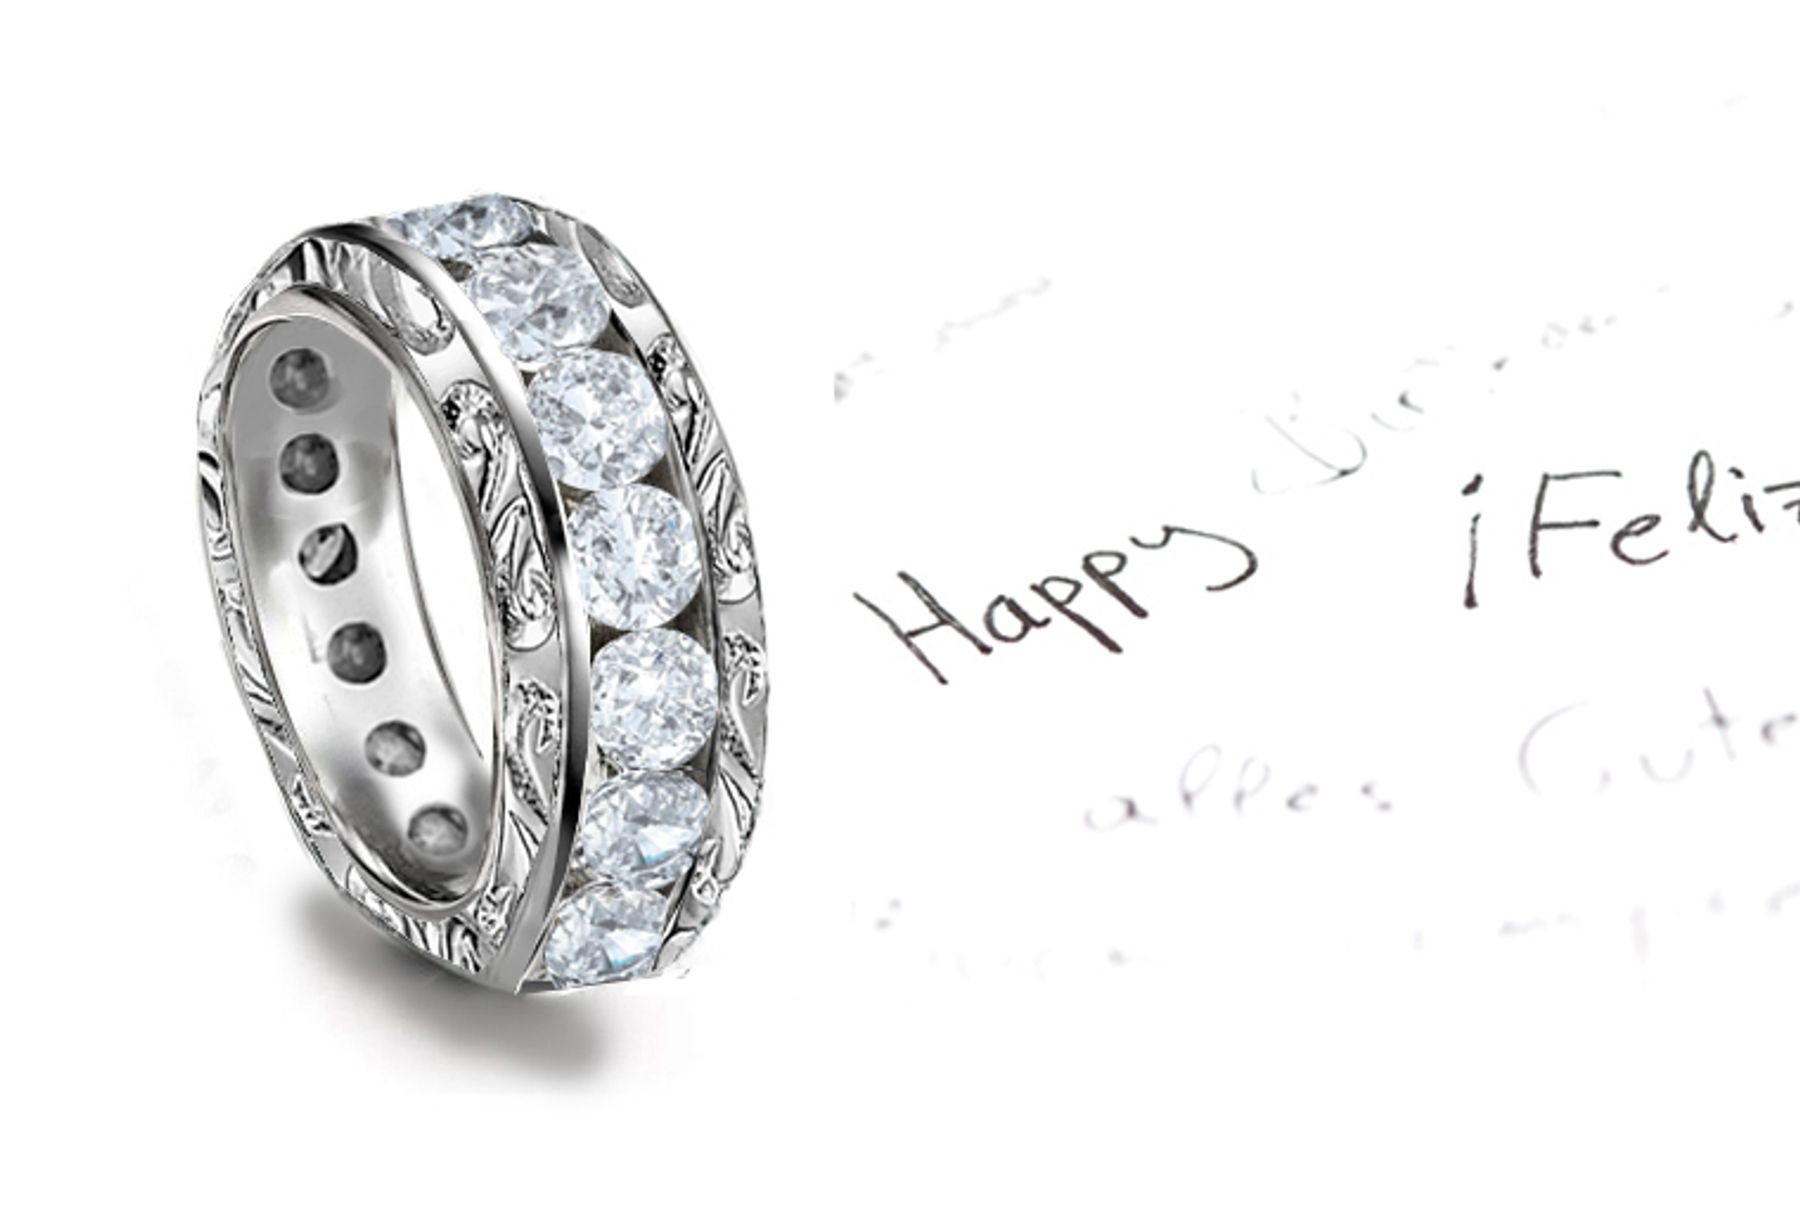 Finest & Choicest: A Designer Diamond Band Engraved with Various Designs, Motifs & Crests 2 to 4 carats Size 6